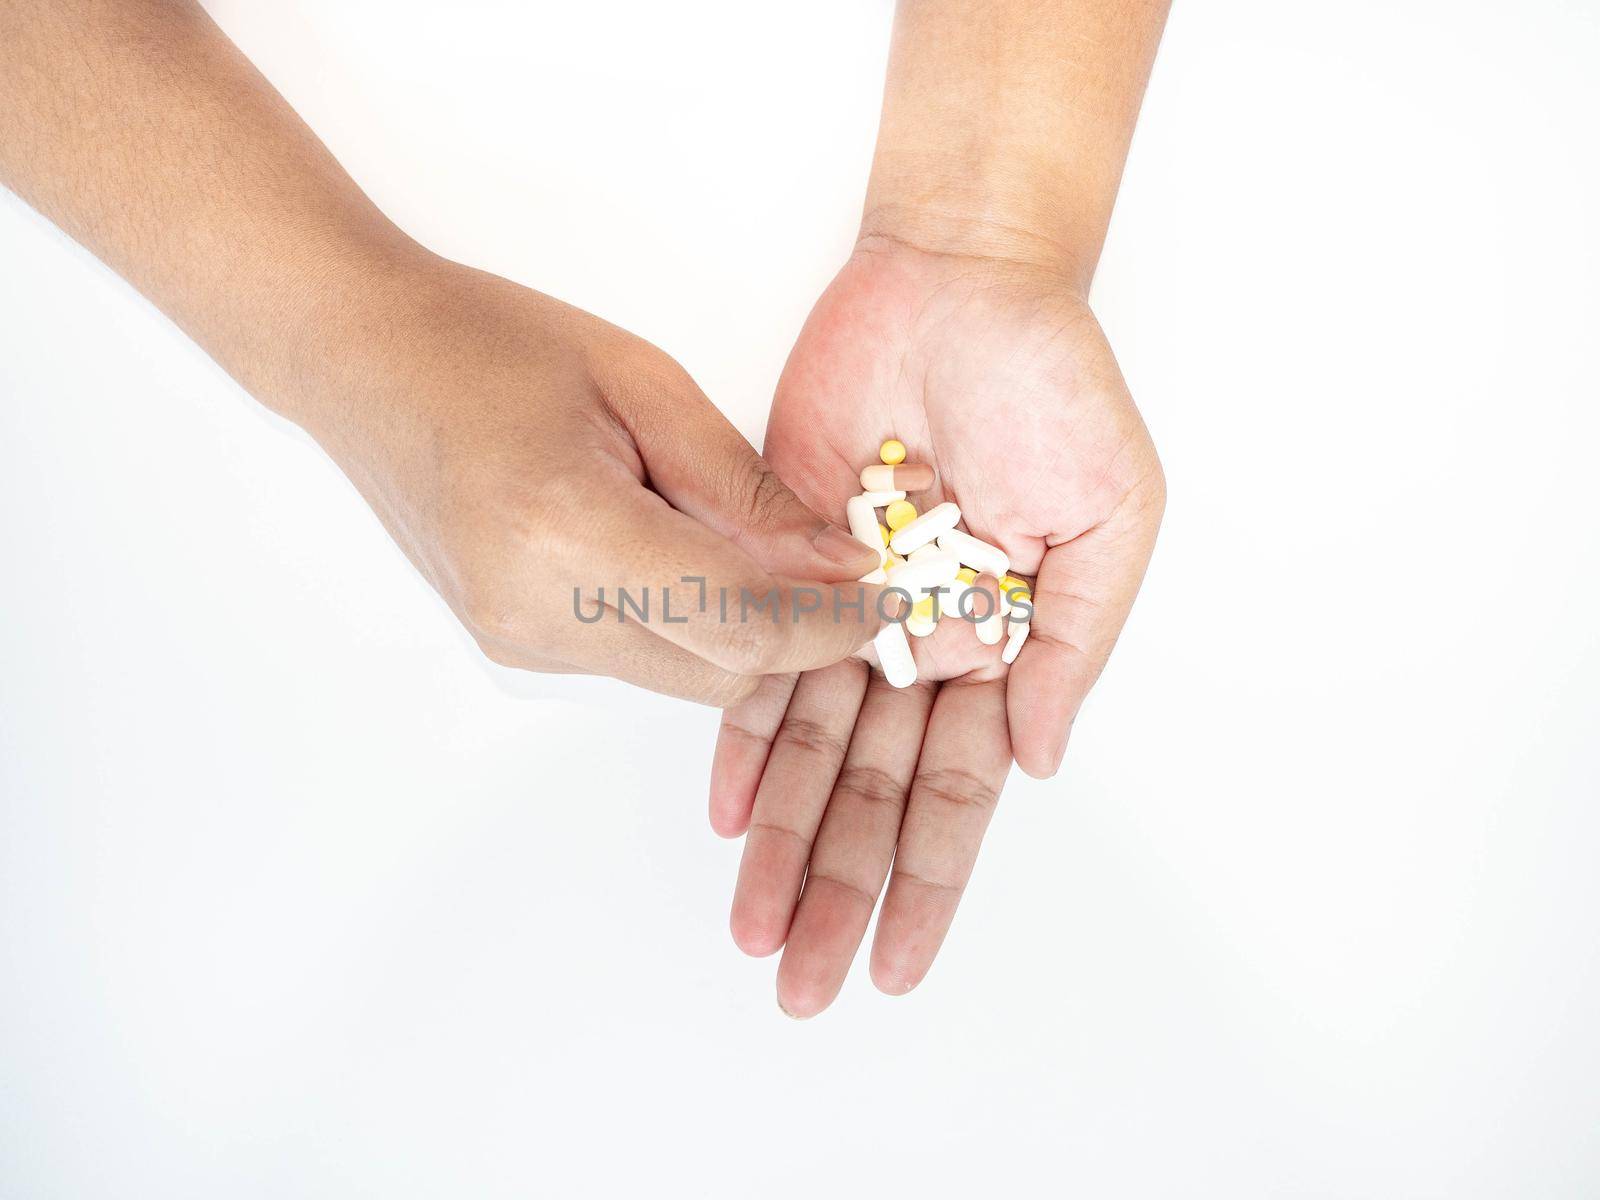 A woman picks up a pill from her hand White background. by Kulpreya